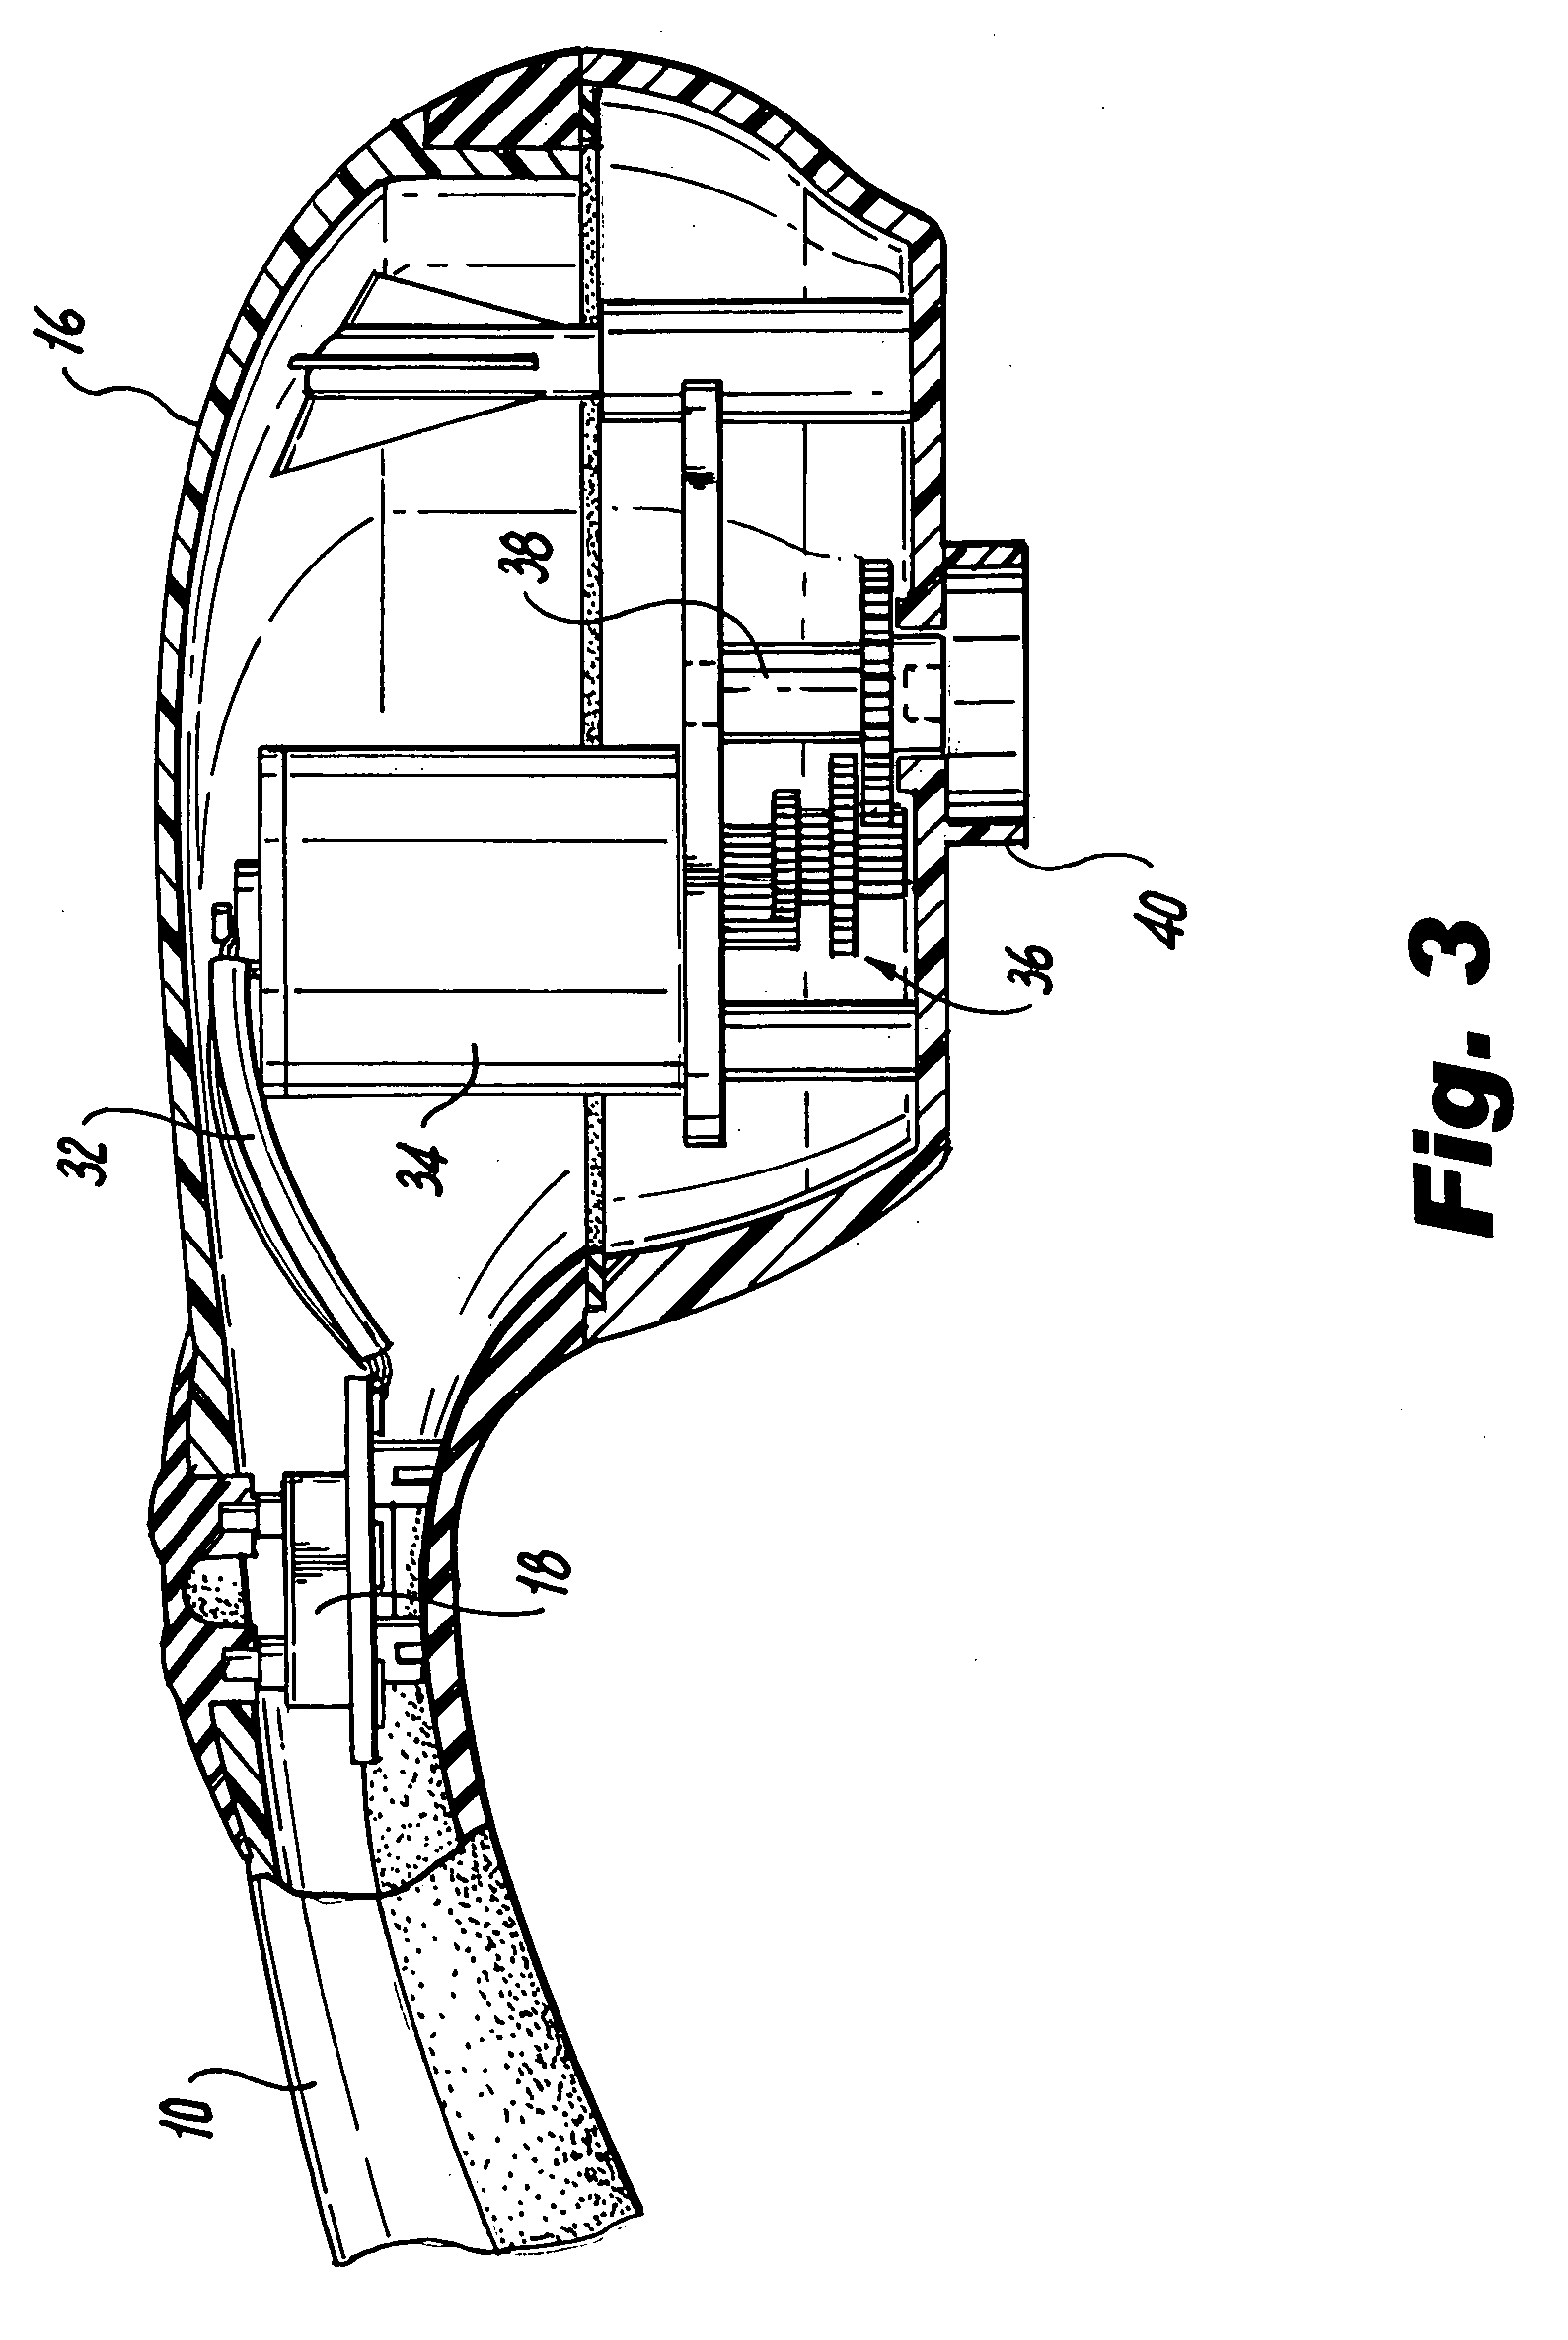 Soap dispensing attachment for hand-held appliance